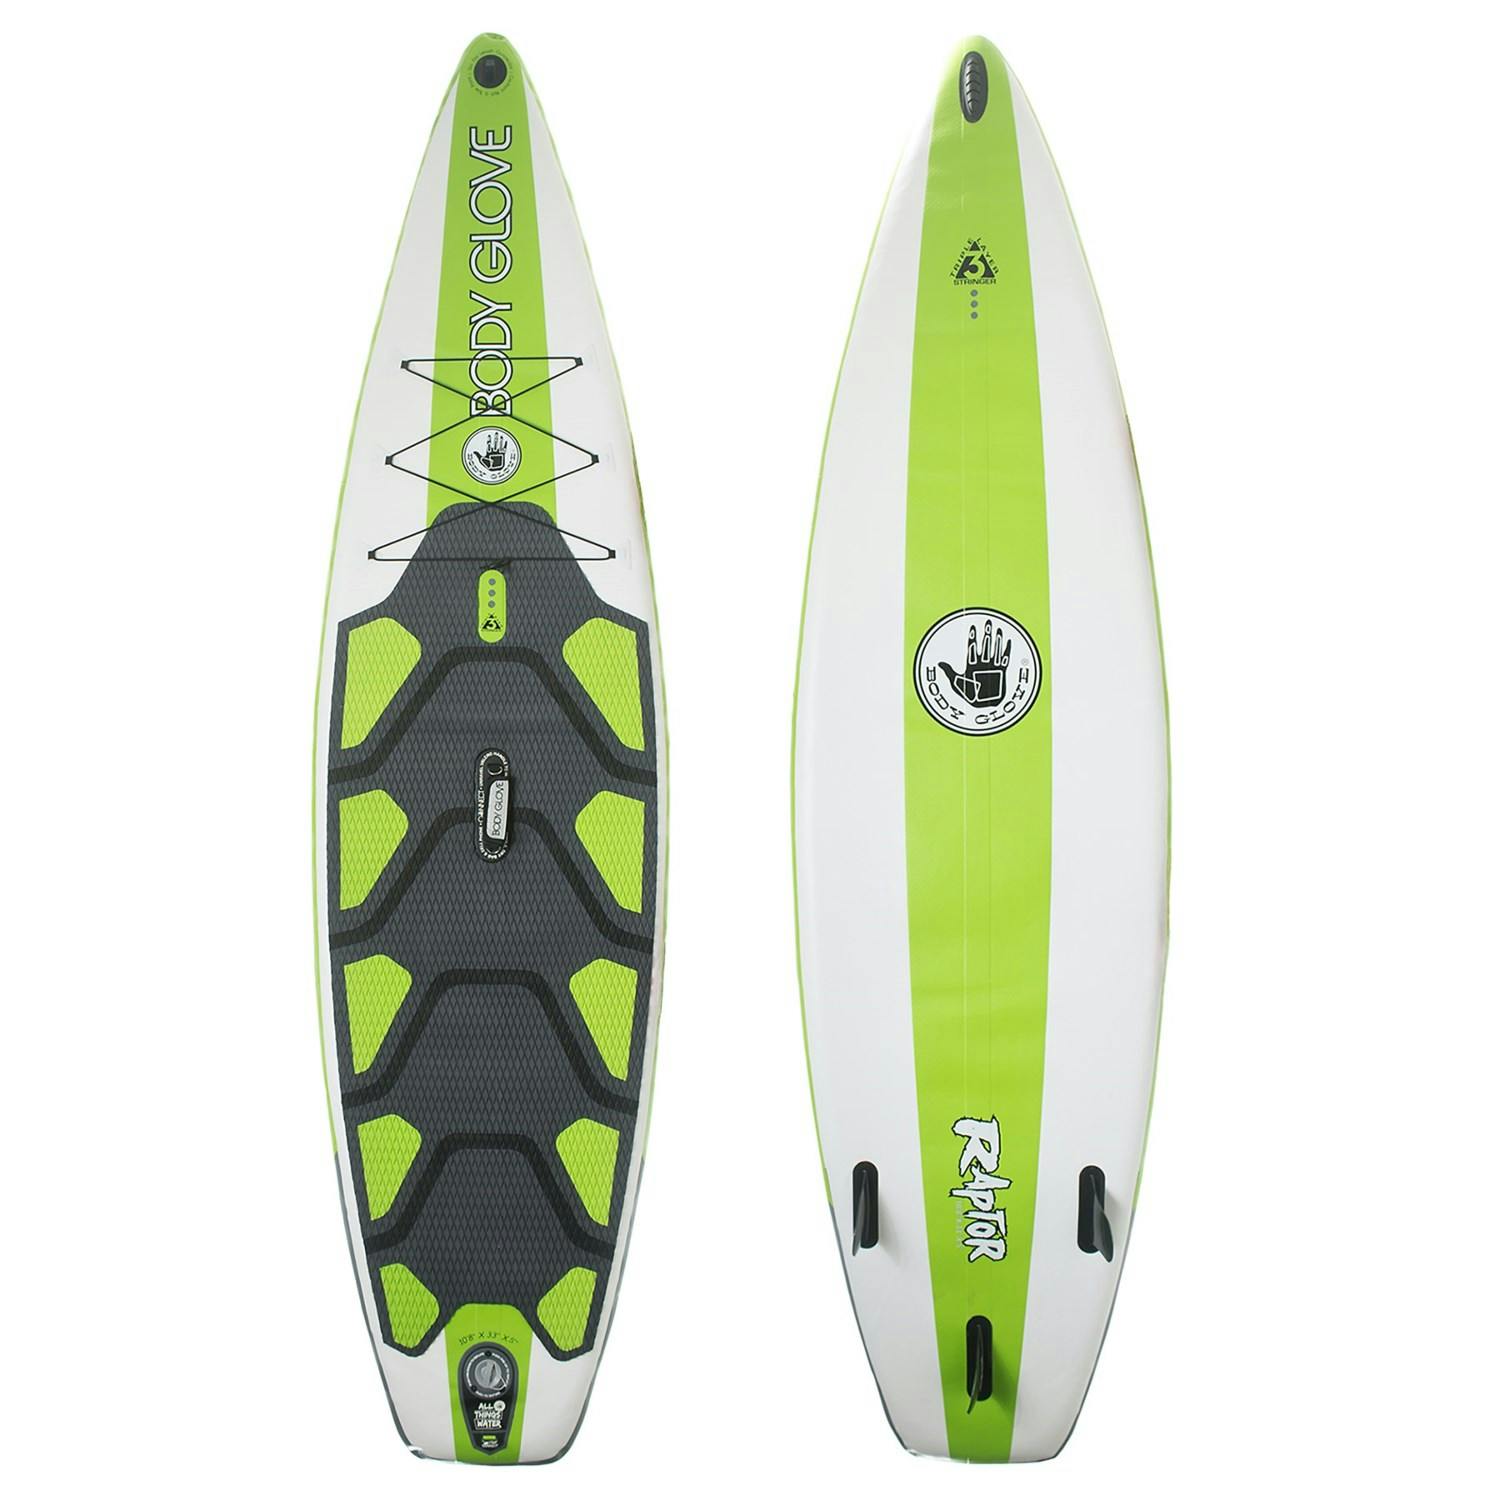 https://activejunky-cdn.s3.amazonaws.com/aj-content/body-glove-raptor-inflatable-stand-up-paddle-board-kit-108-in-white-green_p_338cy_01_1500.2.jpg